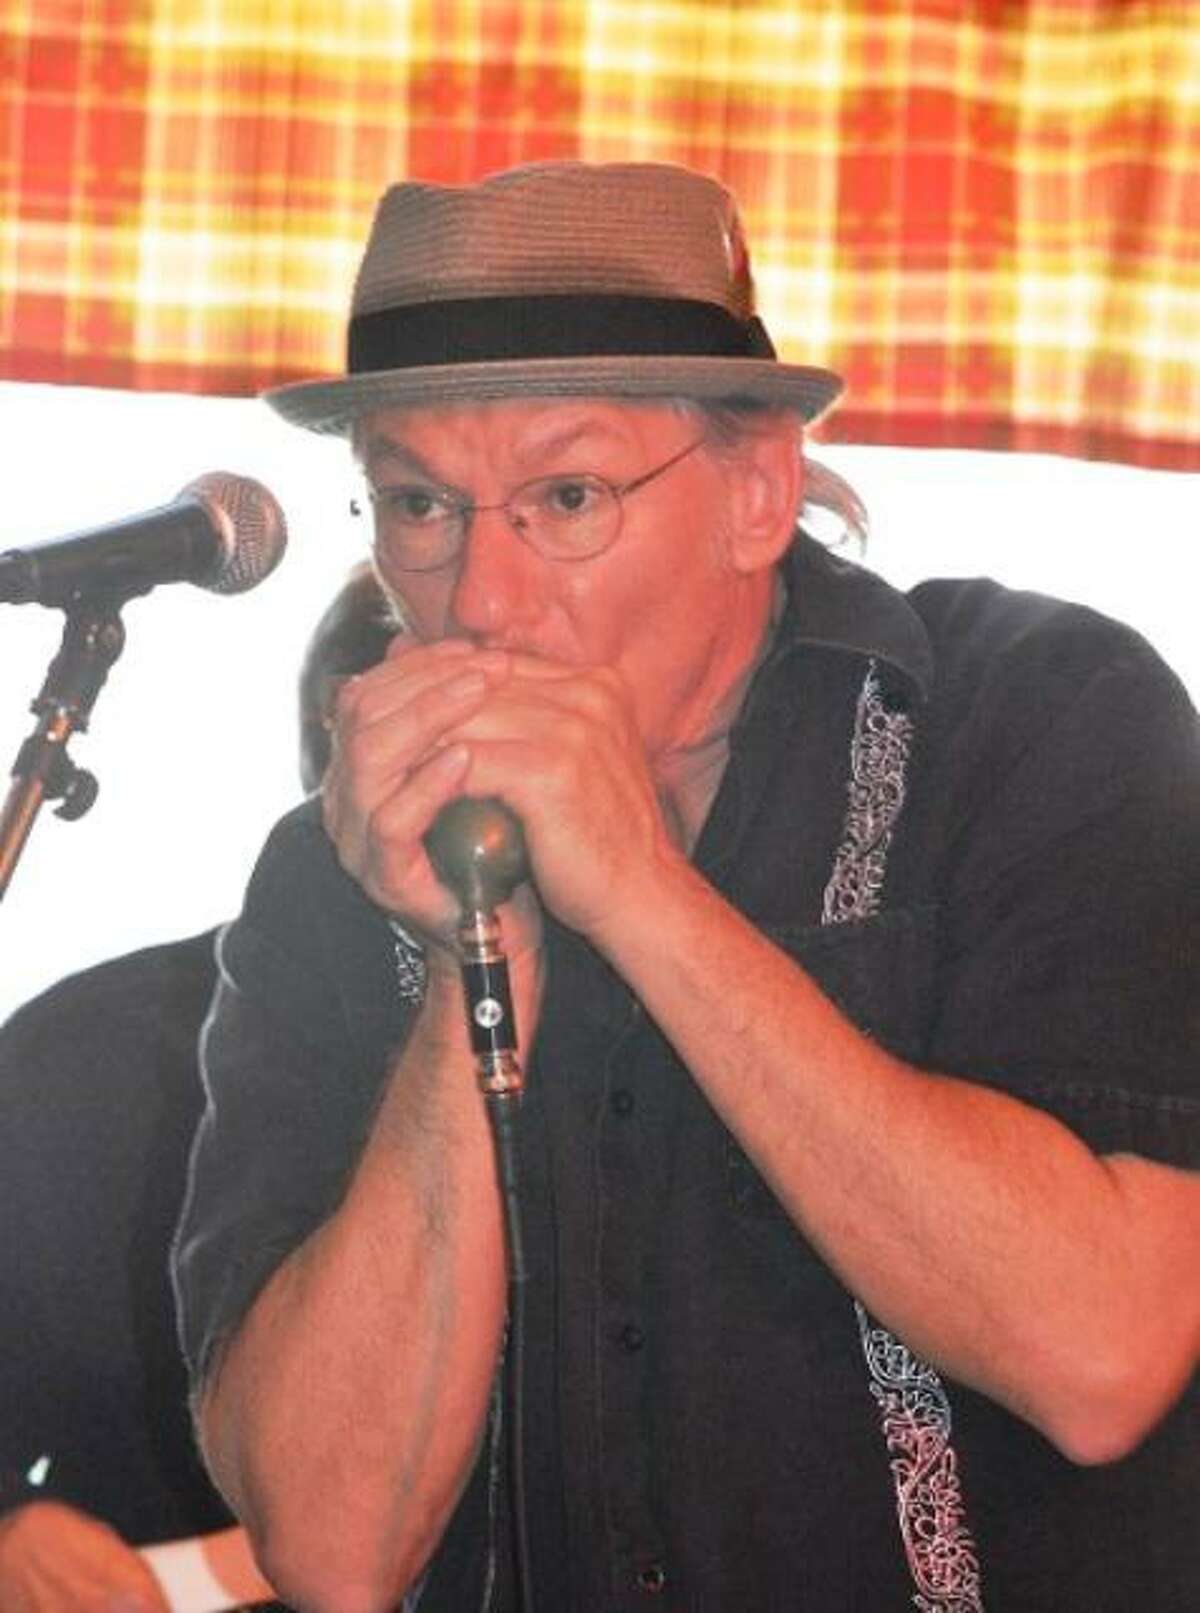 Peter Rost  is ready to lead the Connecticut Blues Society.